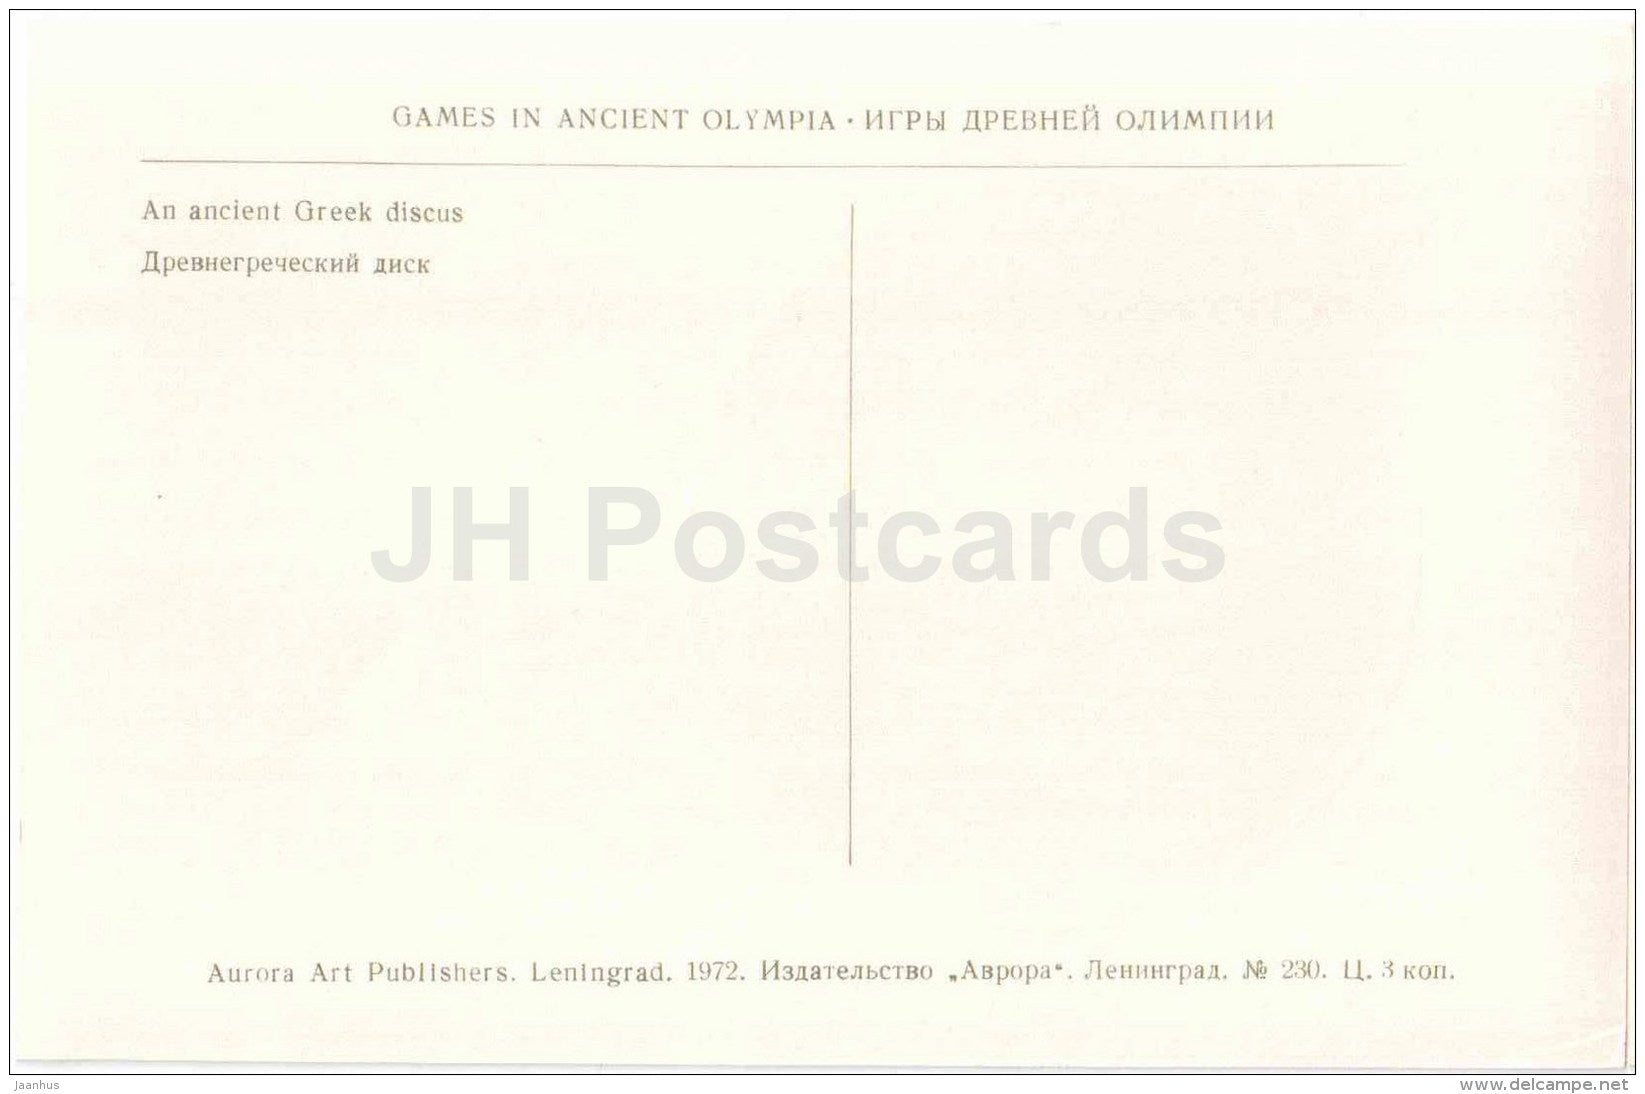 Ancient Greek Discus - dolphin - Games in Ancient Olympia - Greece - 1972 - Russia USSR - unused - JH Postcards